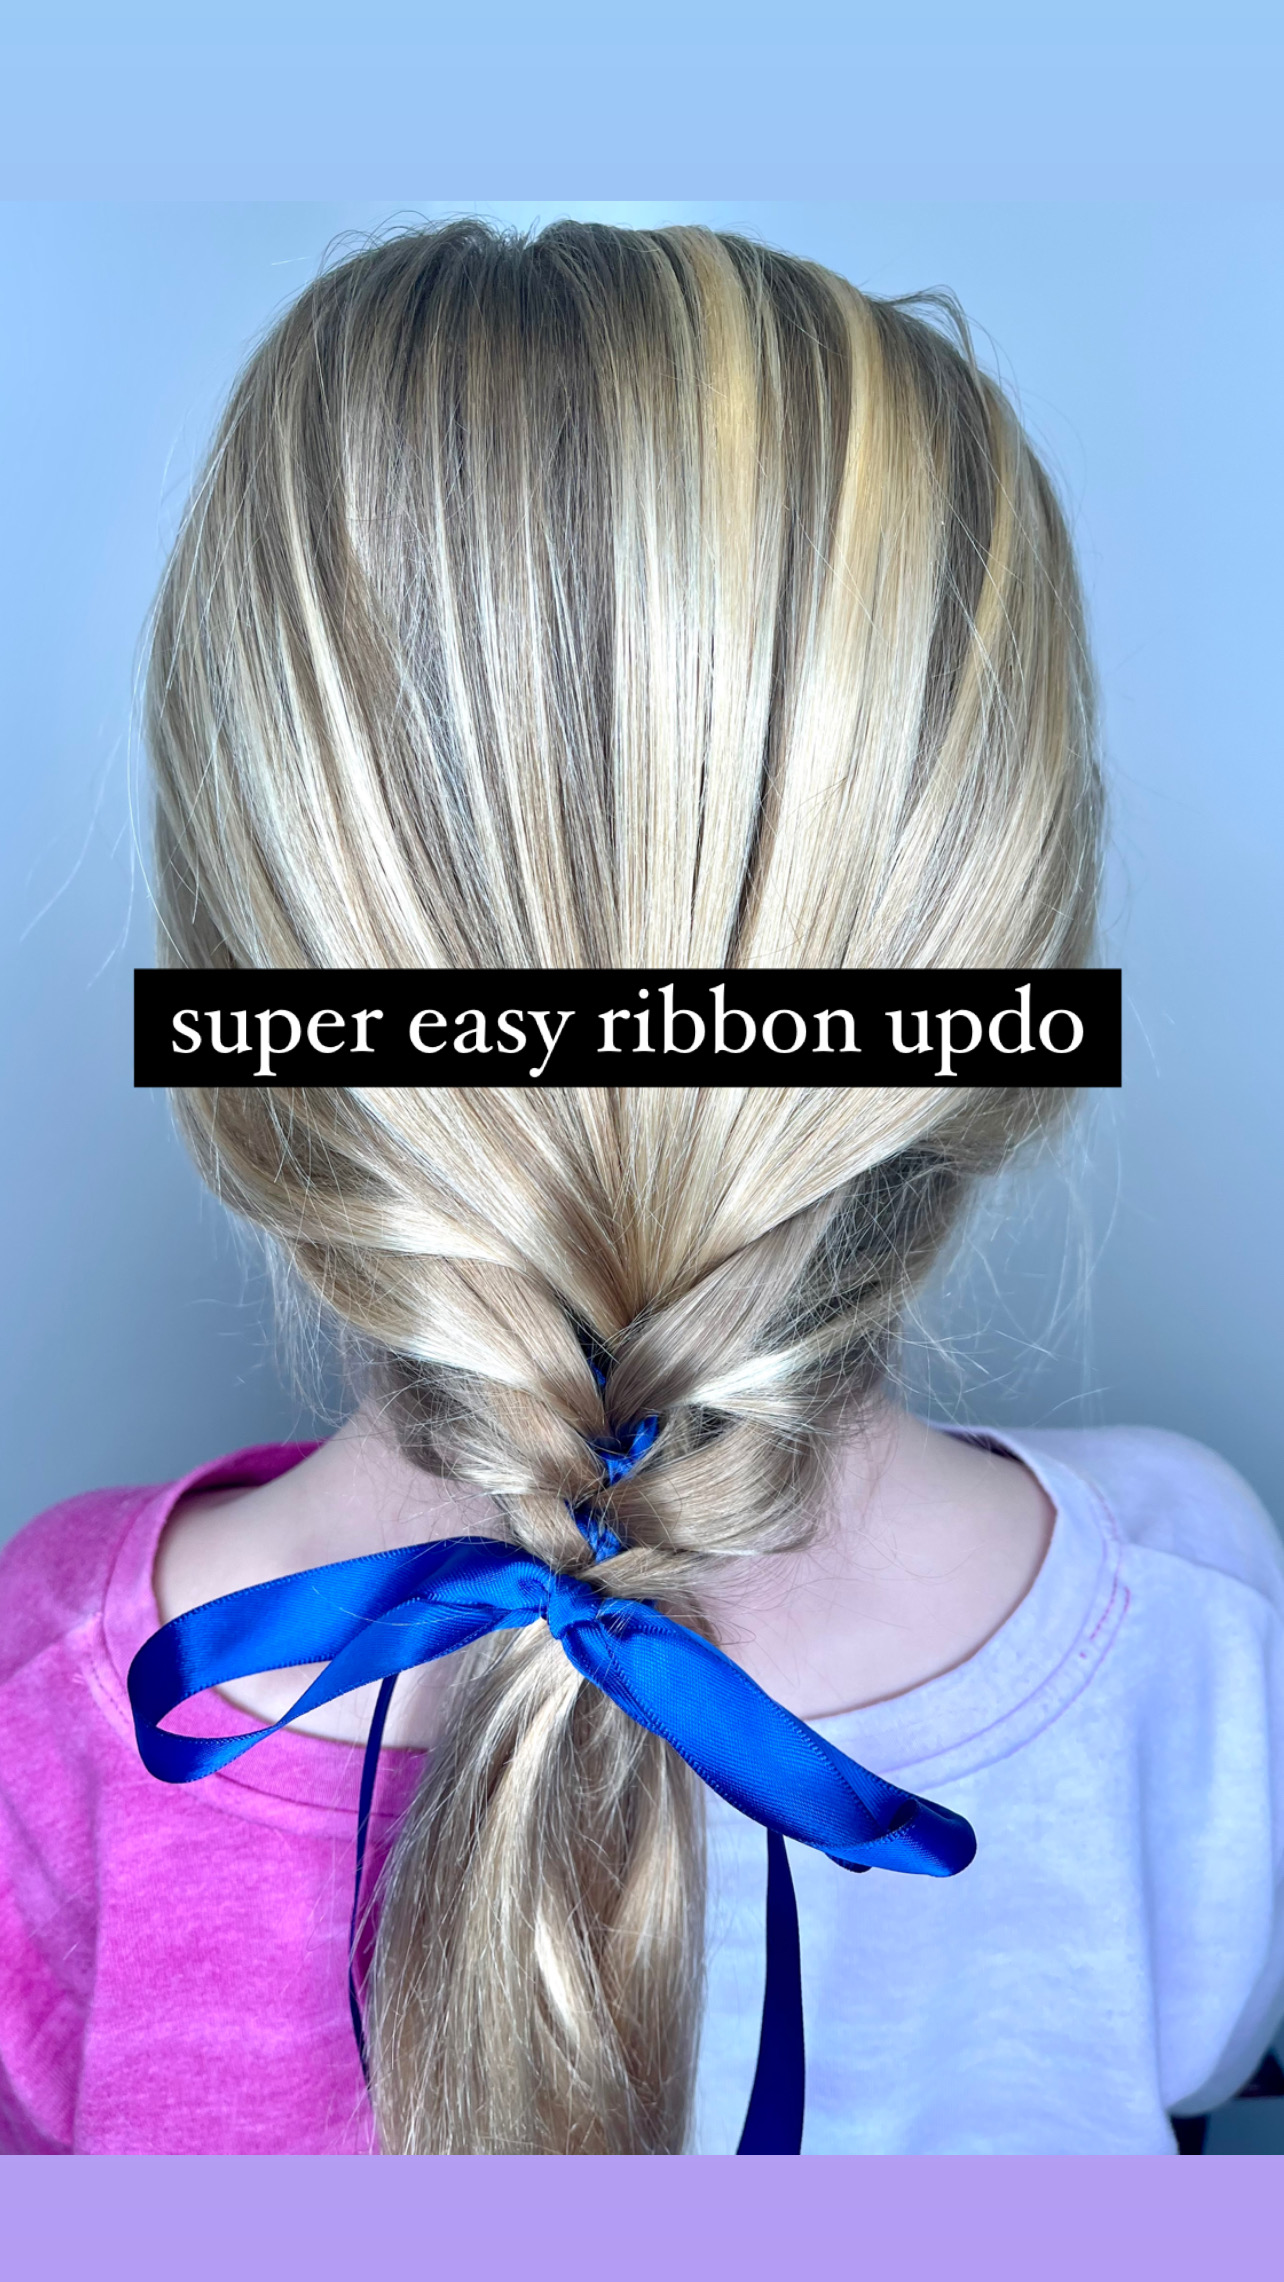 Cute Braid Hairstyle for the Summer - Stylish Life for Moms